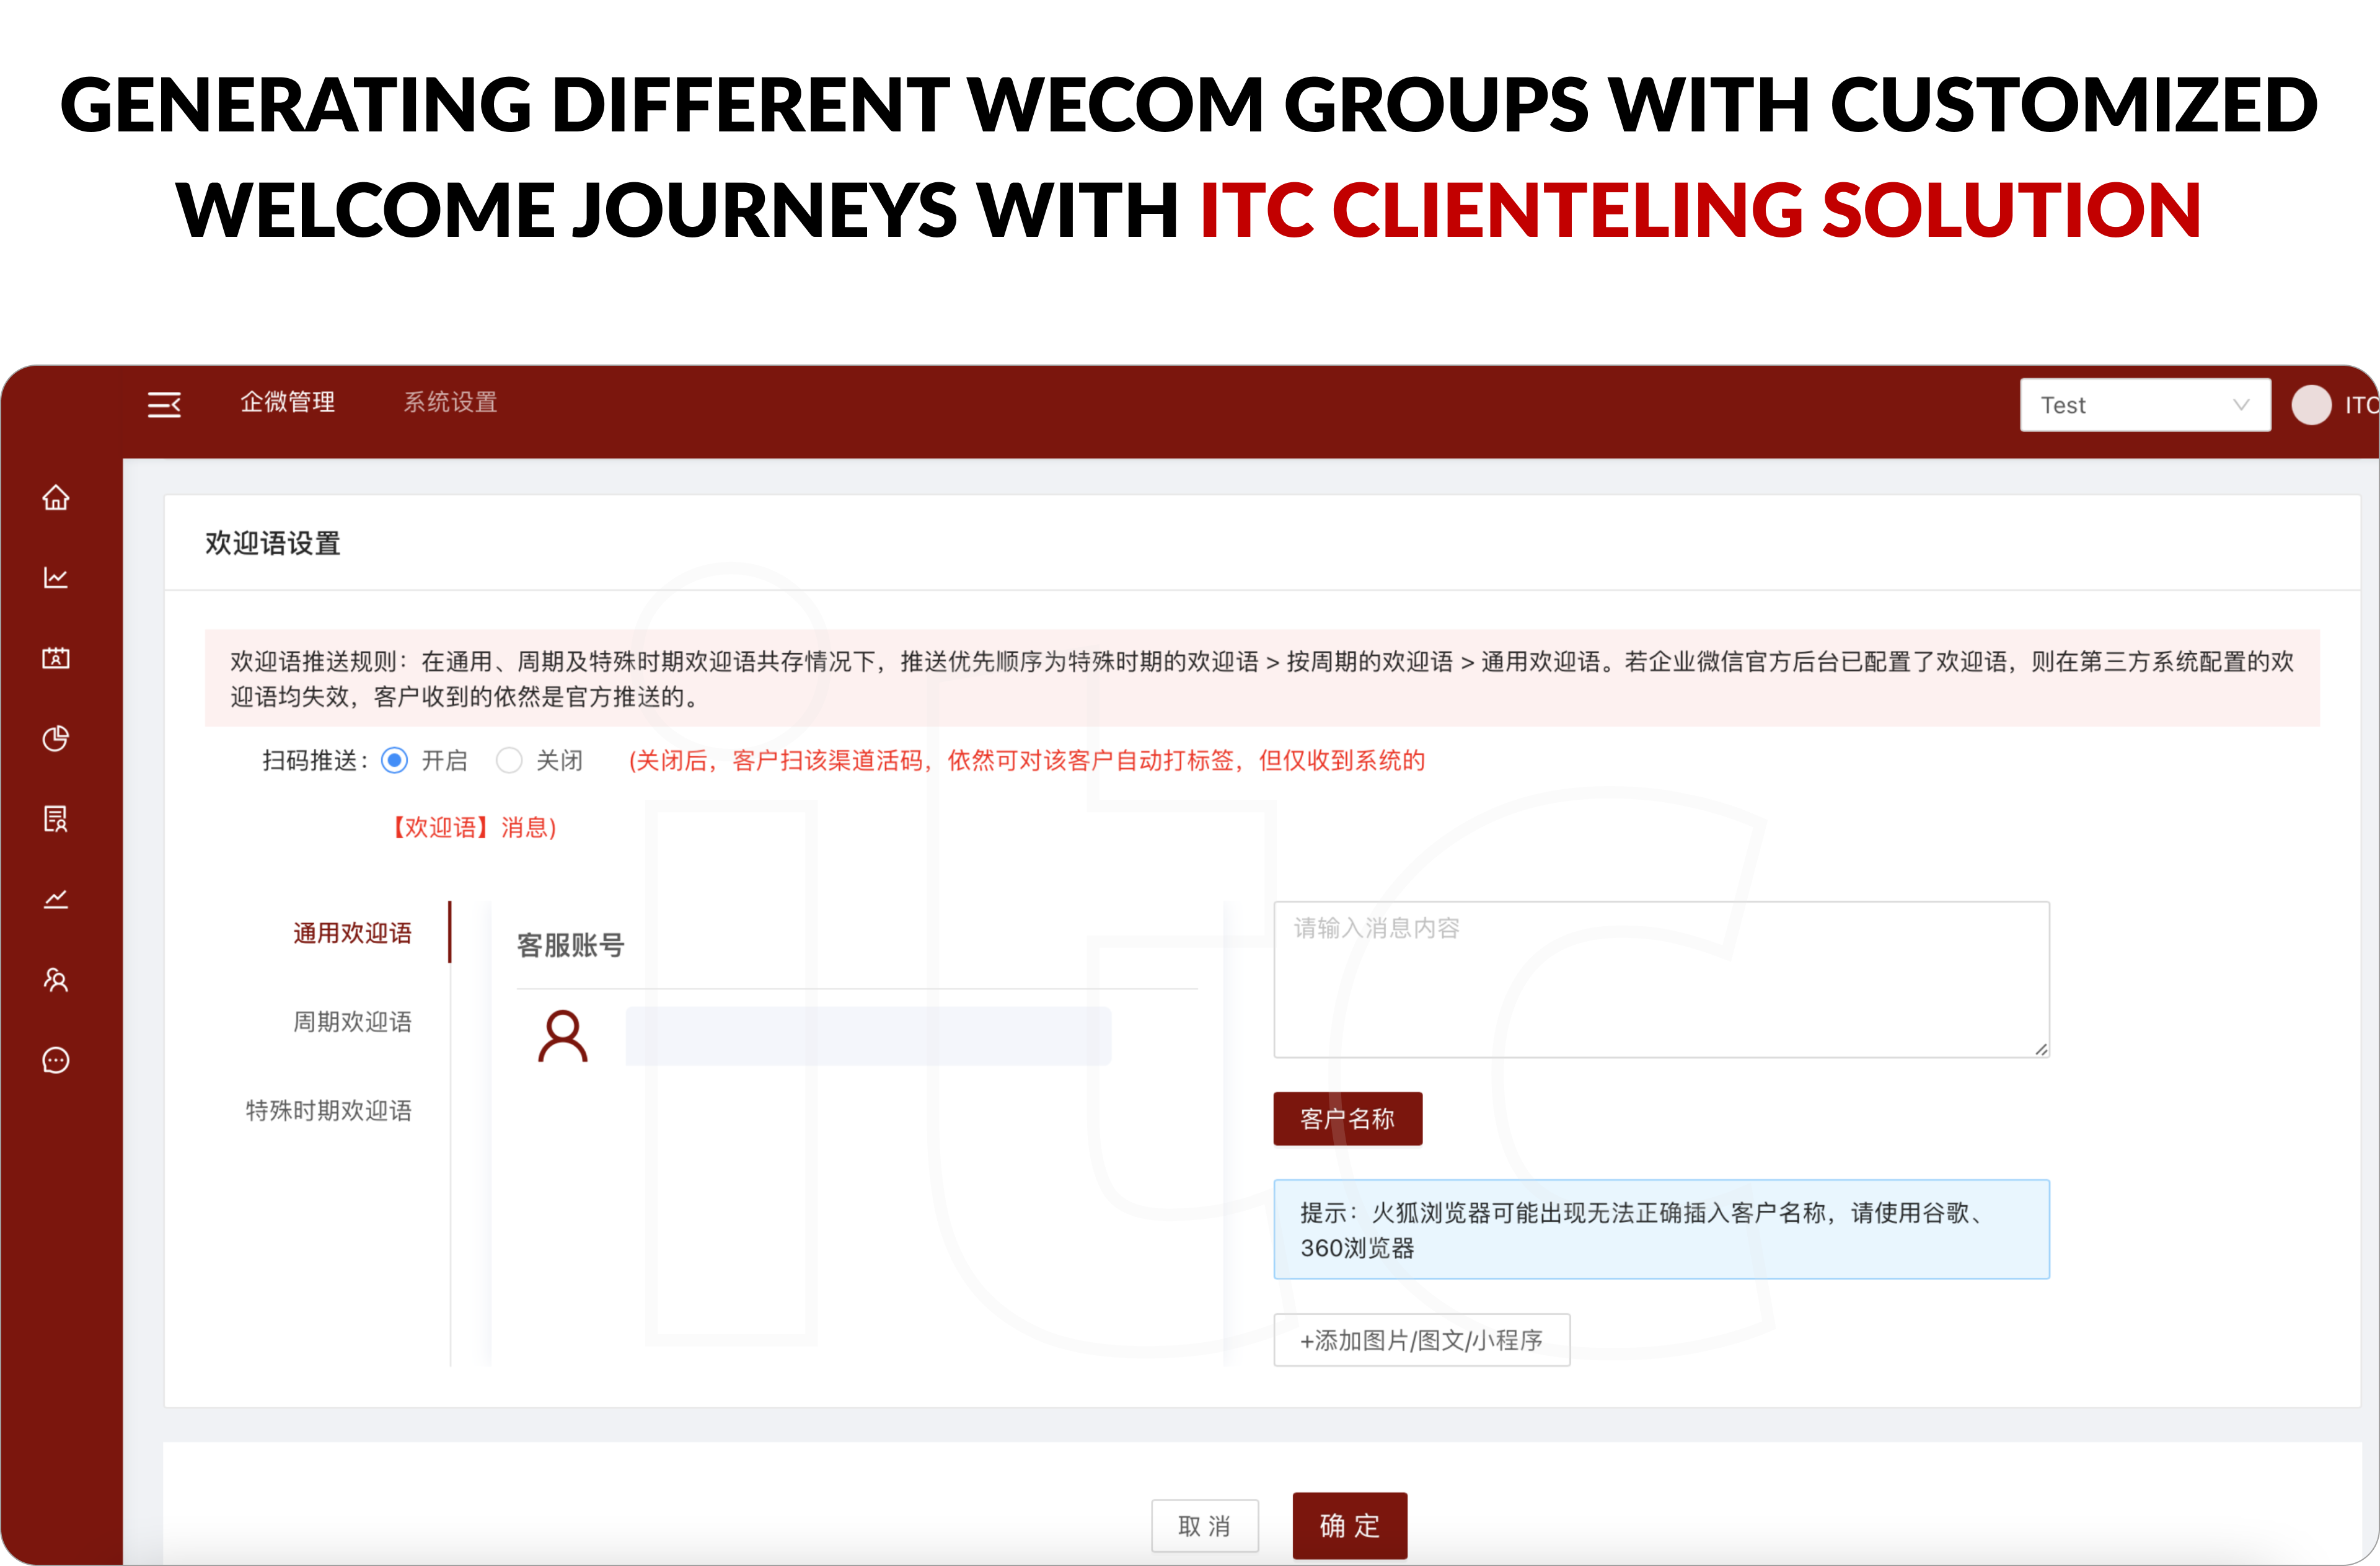 Brands can generate different WeCom groups with customized welcome journeys using ITC Clienteling Solution plugged into WeCom